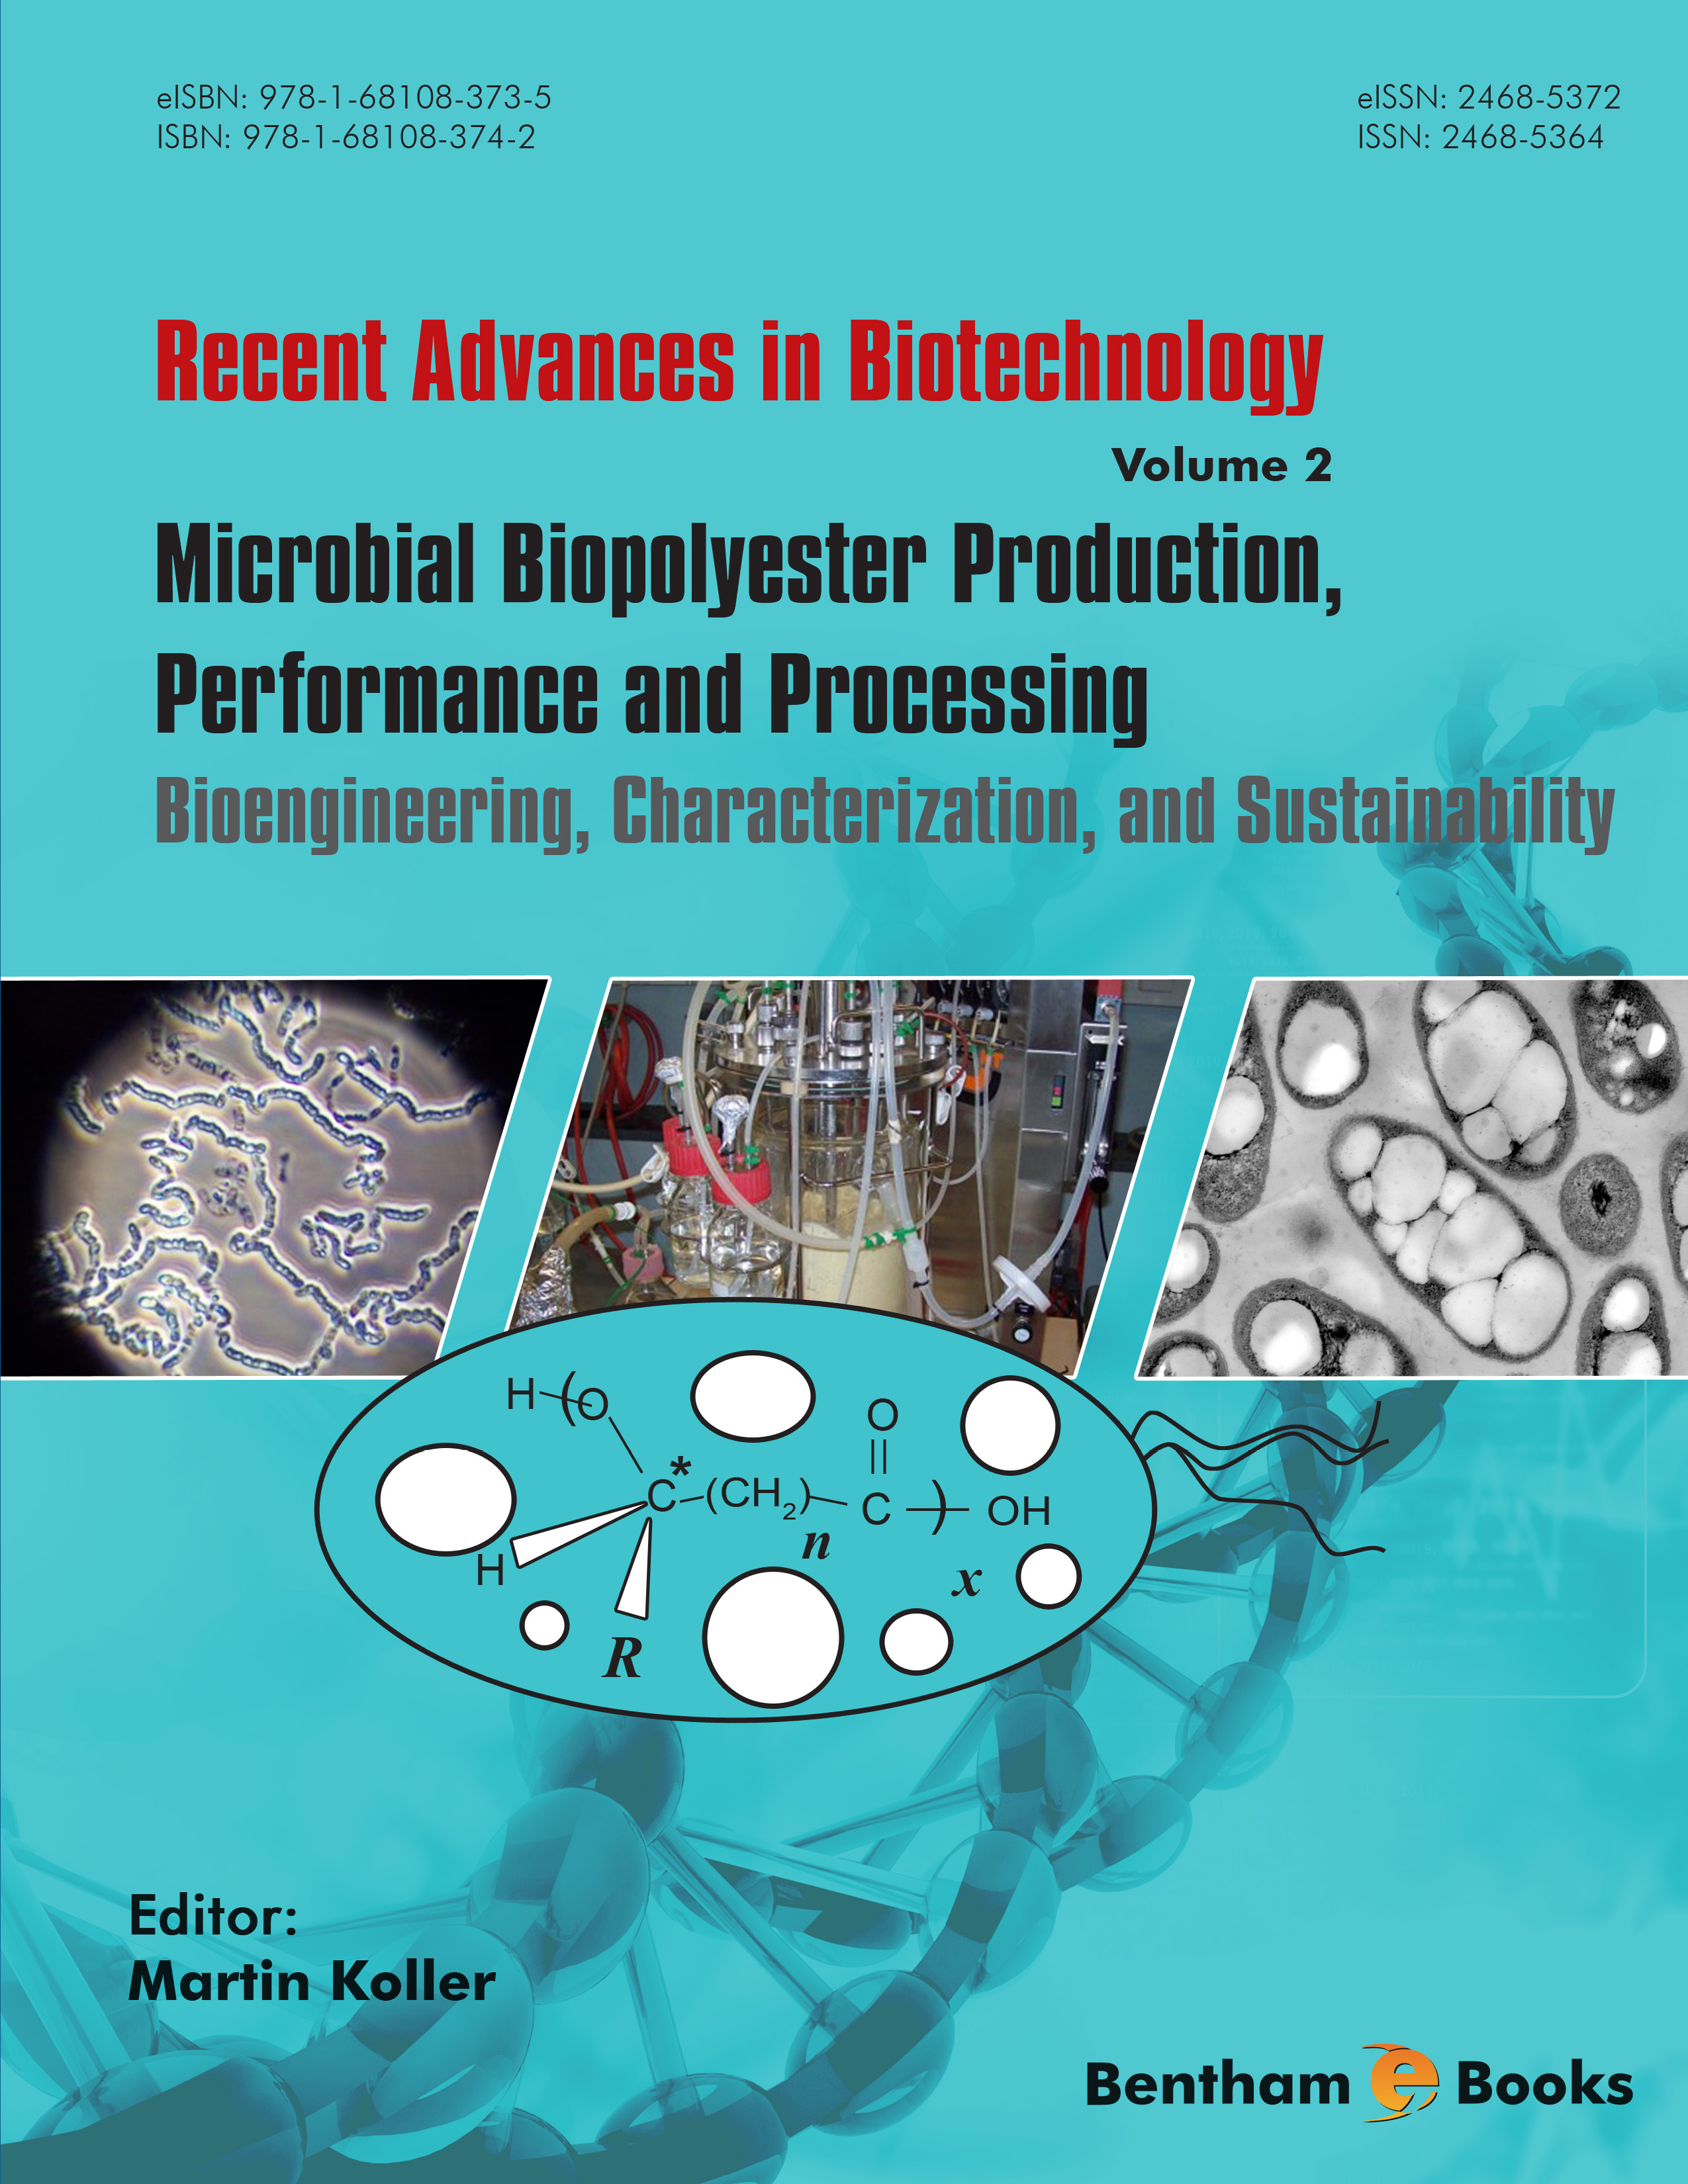 Microbial Biopolyester Production, Performance and Processing